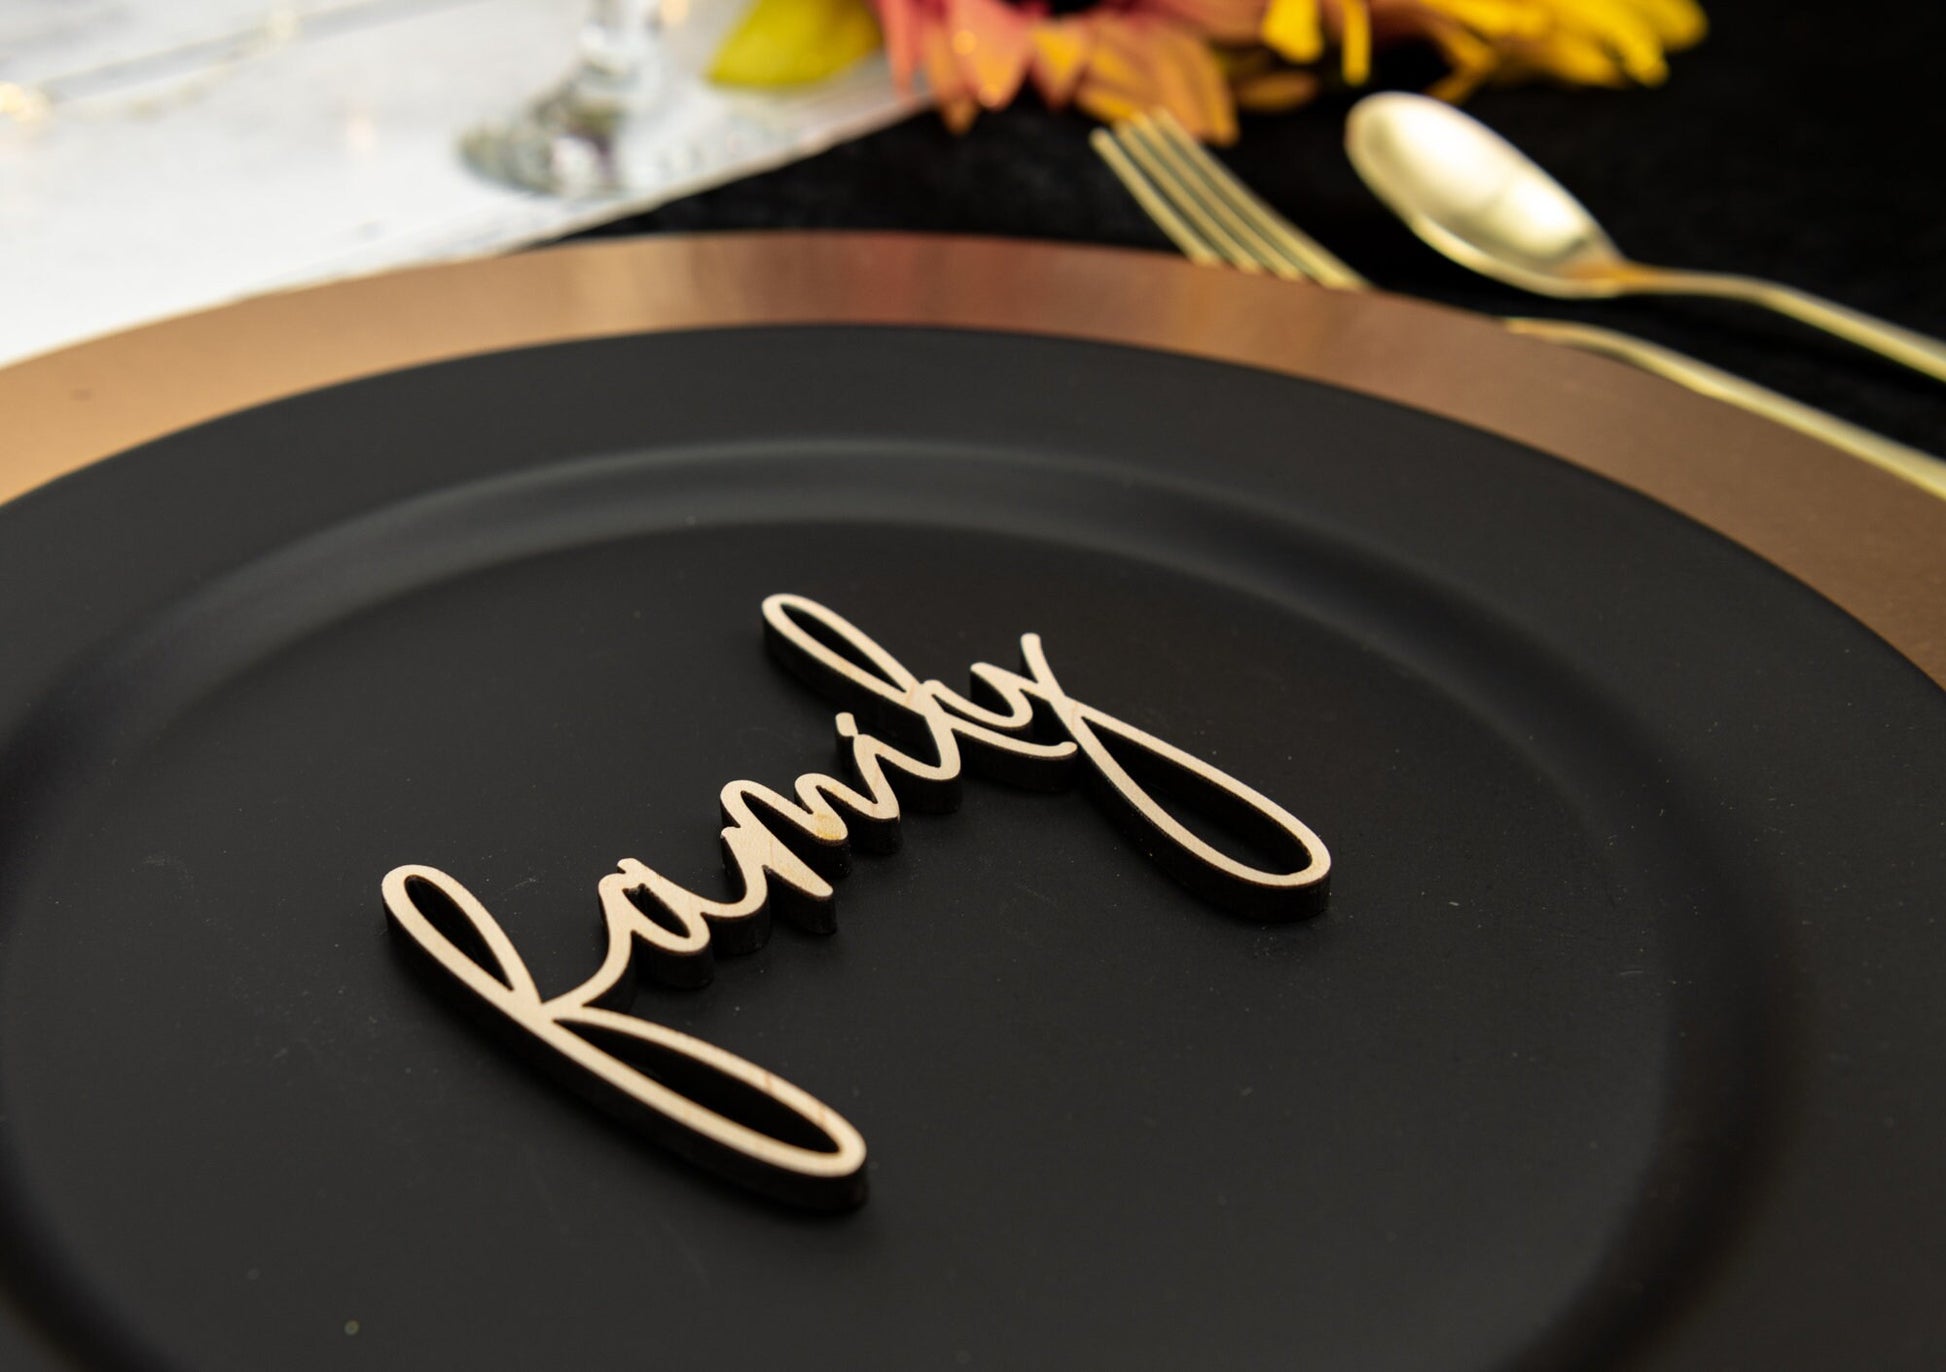 Family Place Cards, Thanksgiving Table Plate Settings, Family Wood Word, Holiday Decor, Thanksgiving Place settings, Small Thankful Sign